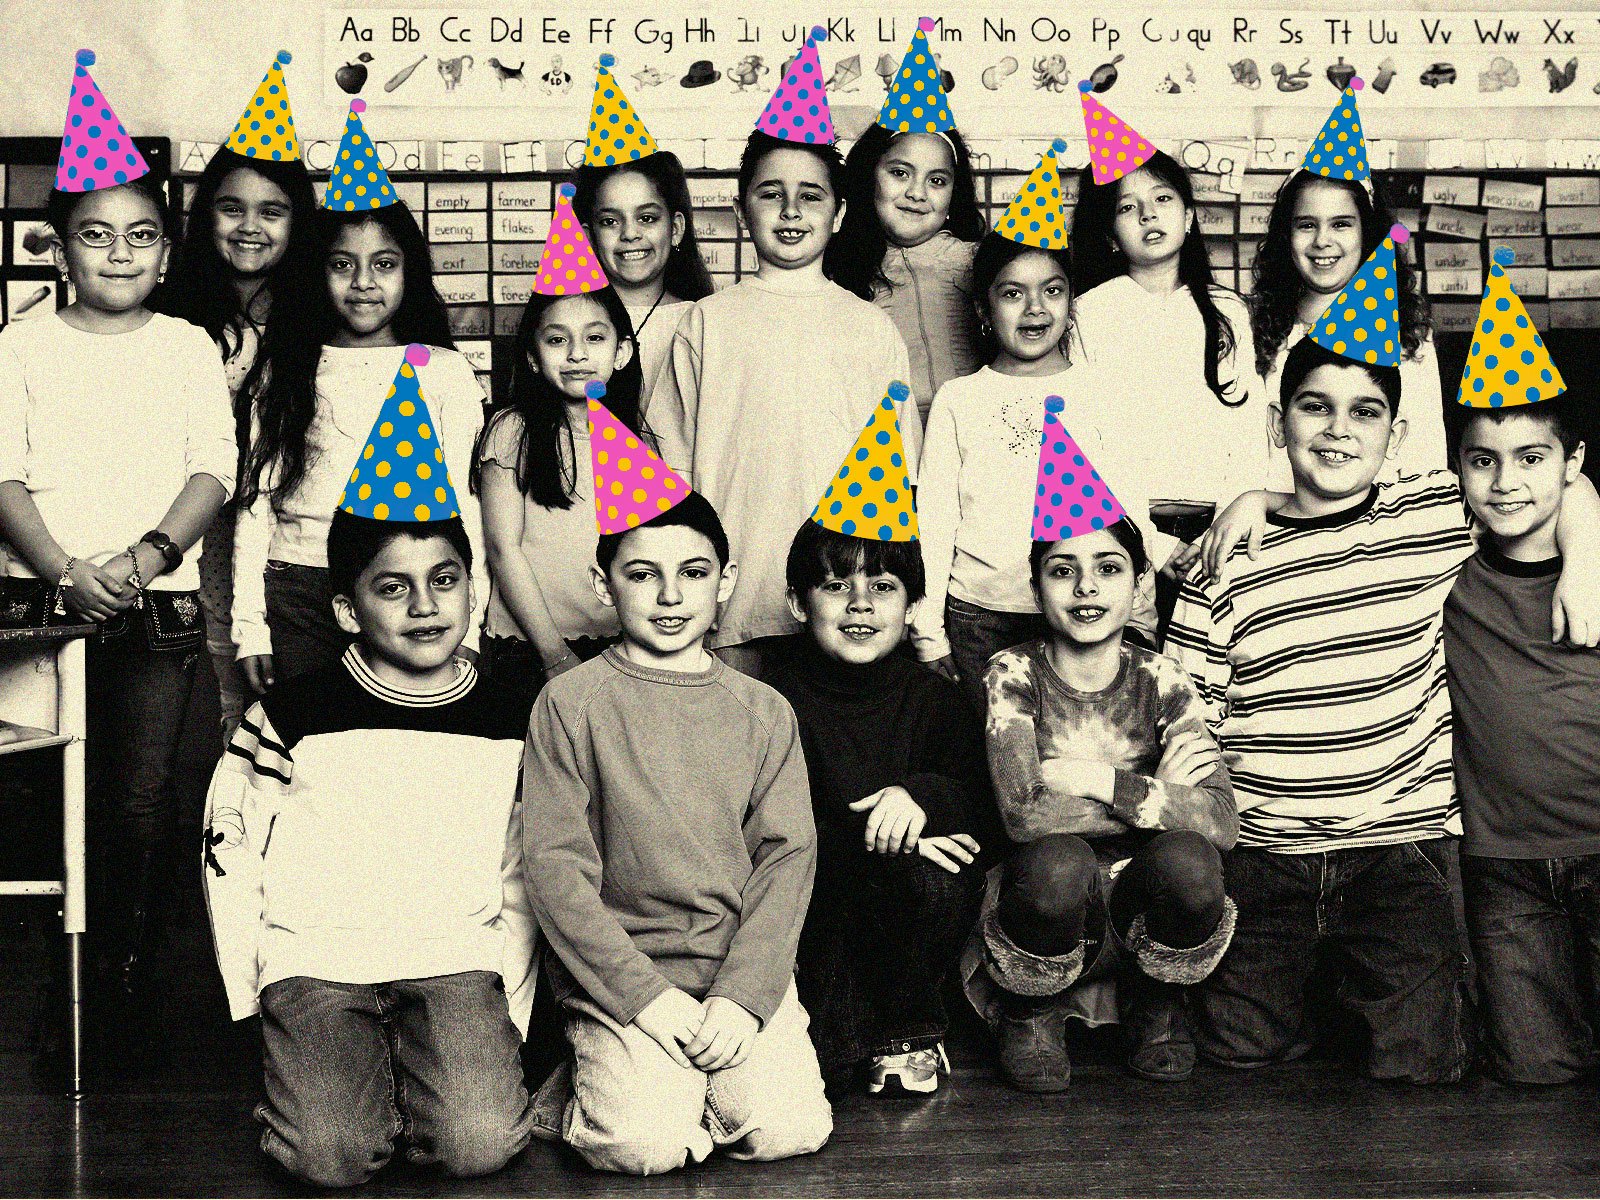 Can We Stop Inviting The Whole Class To The Birthday Party